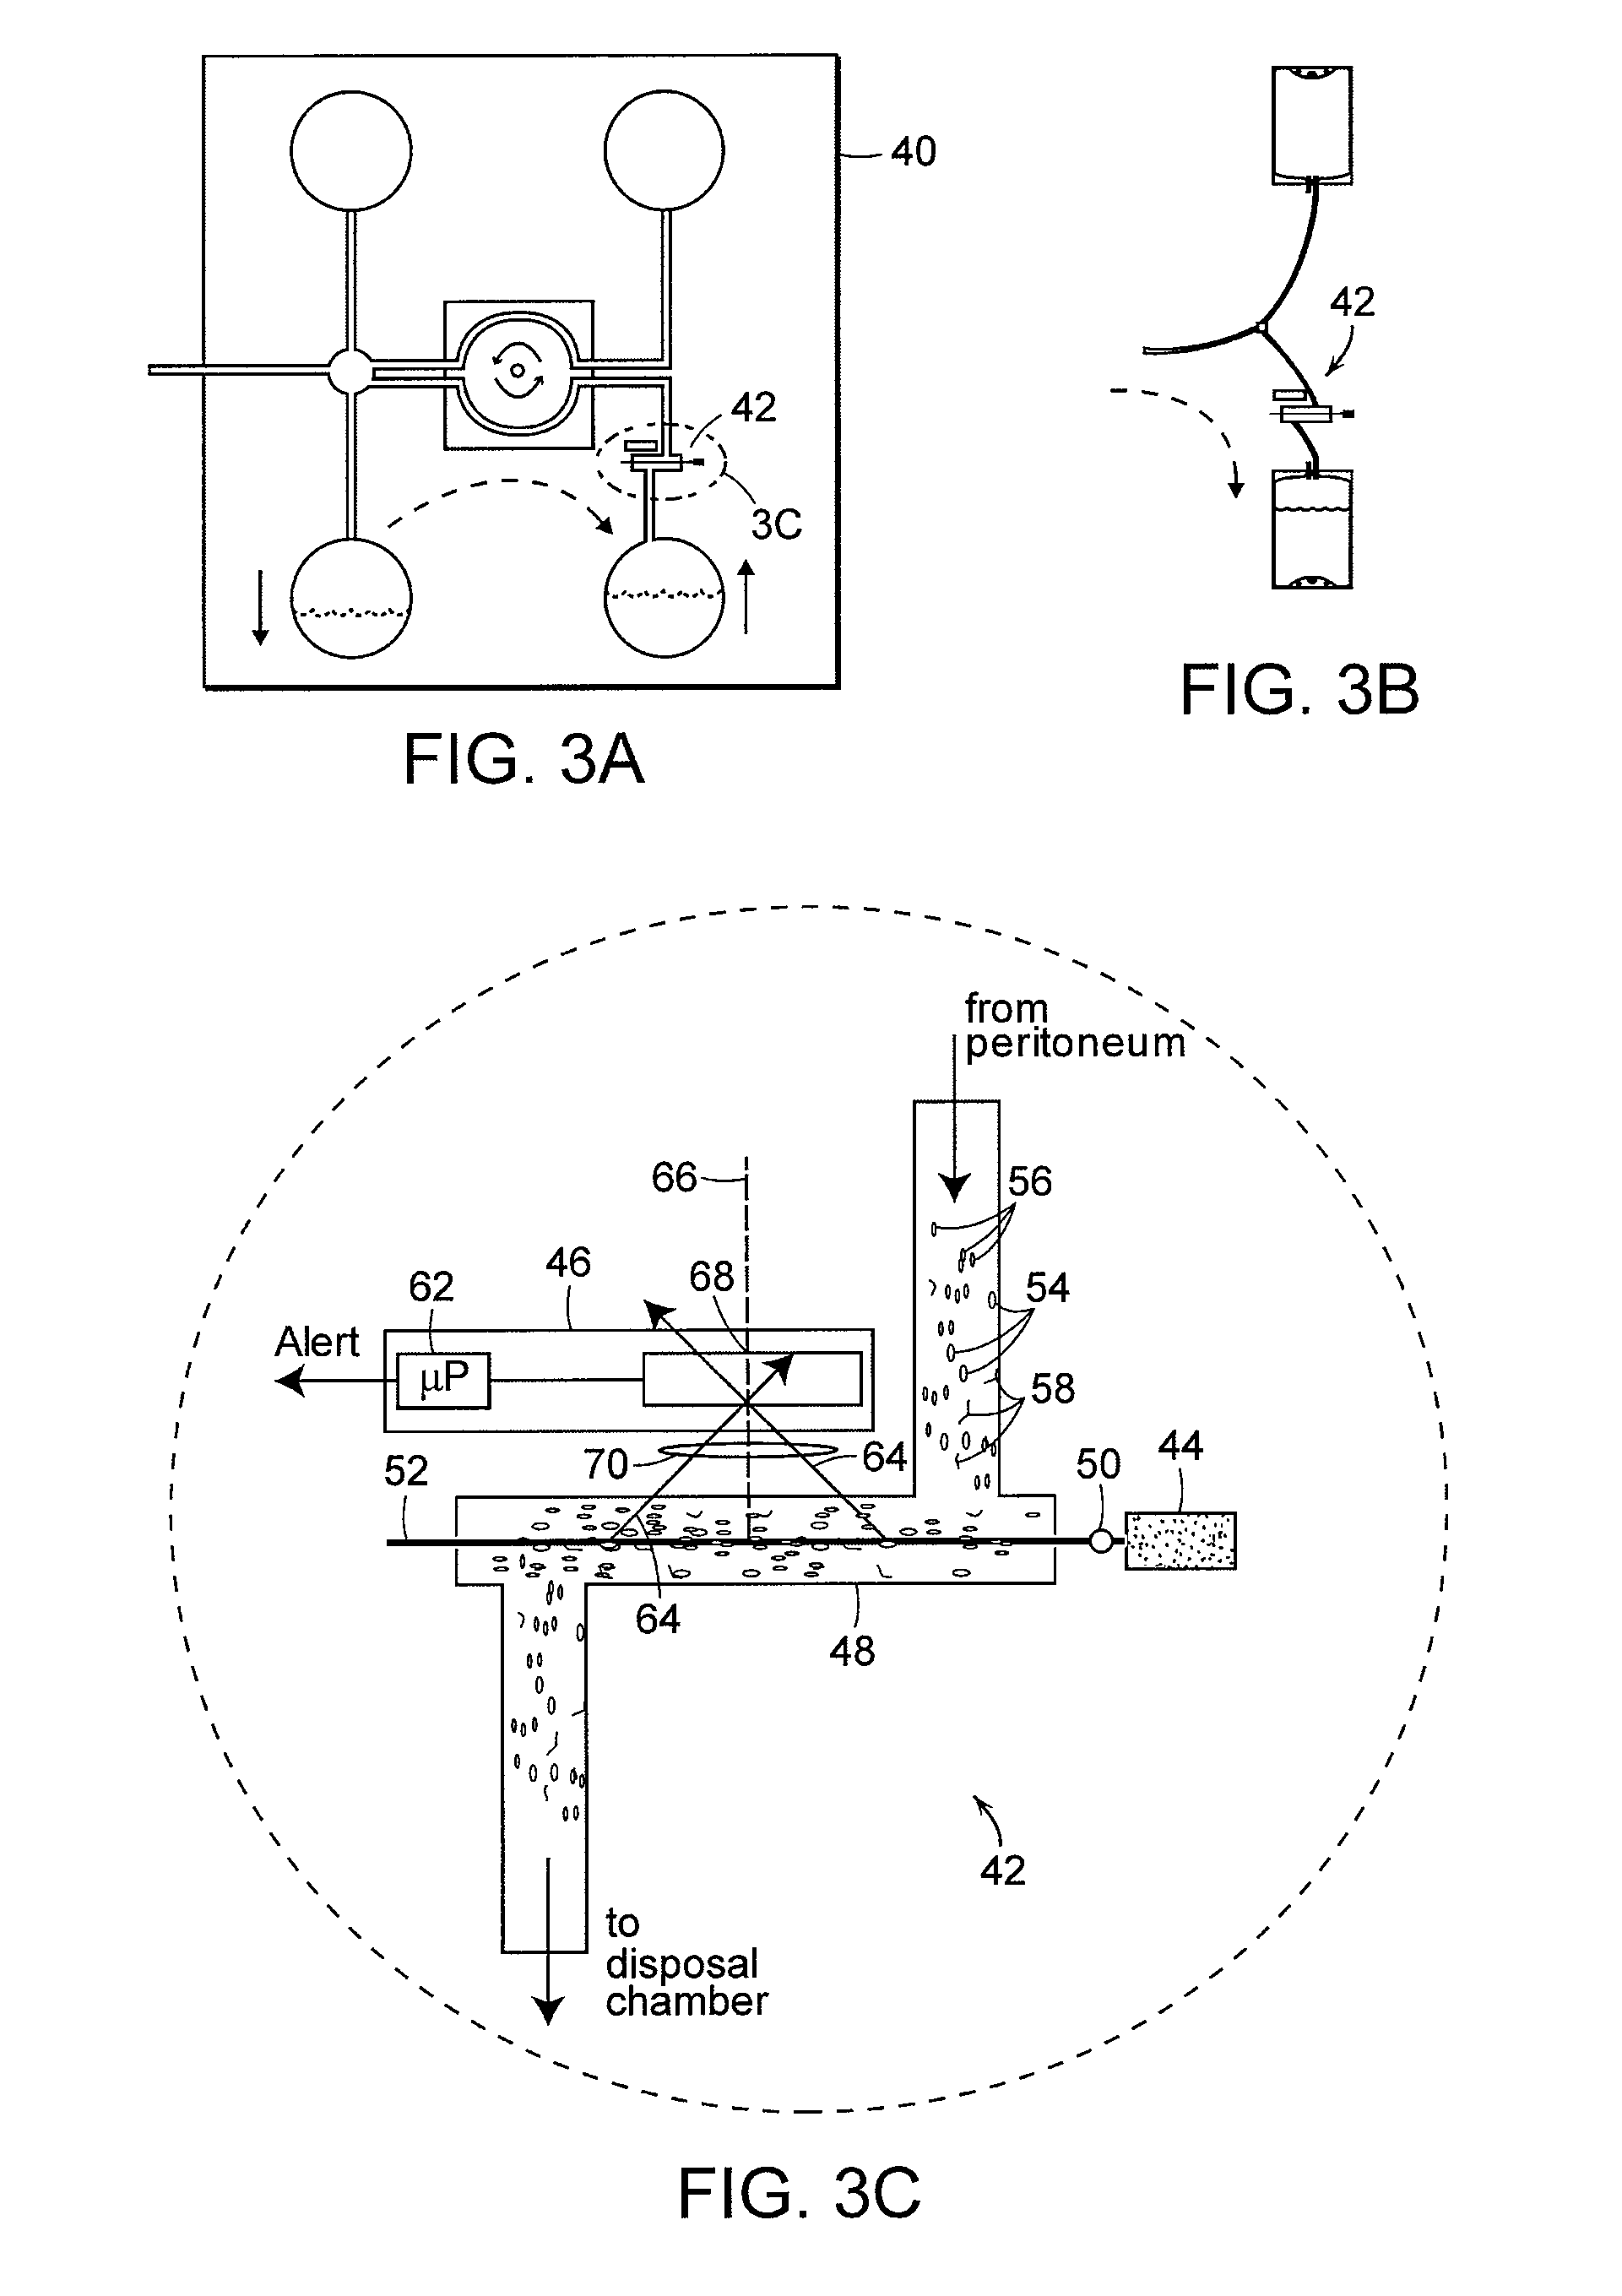 Apparatus and methods for early stage peritonitis detection and for in vivo testing of bodily fluid